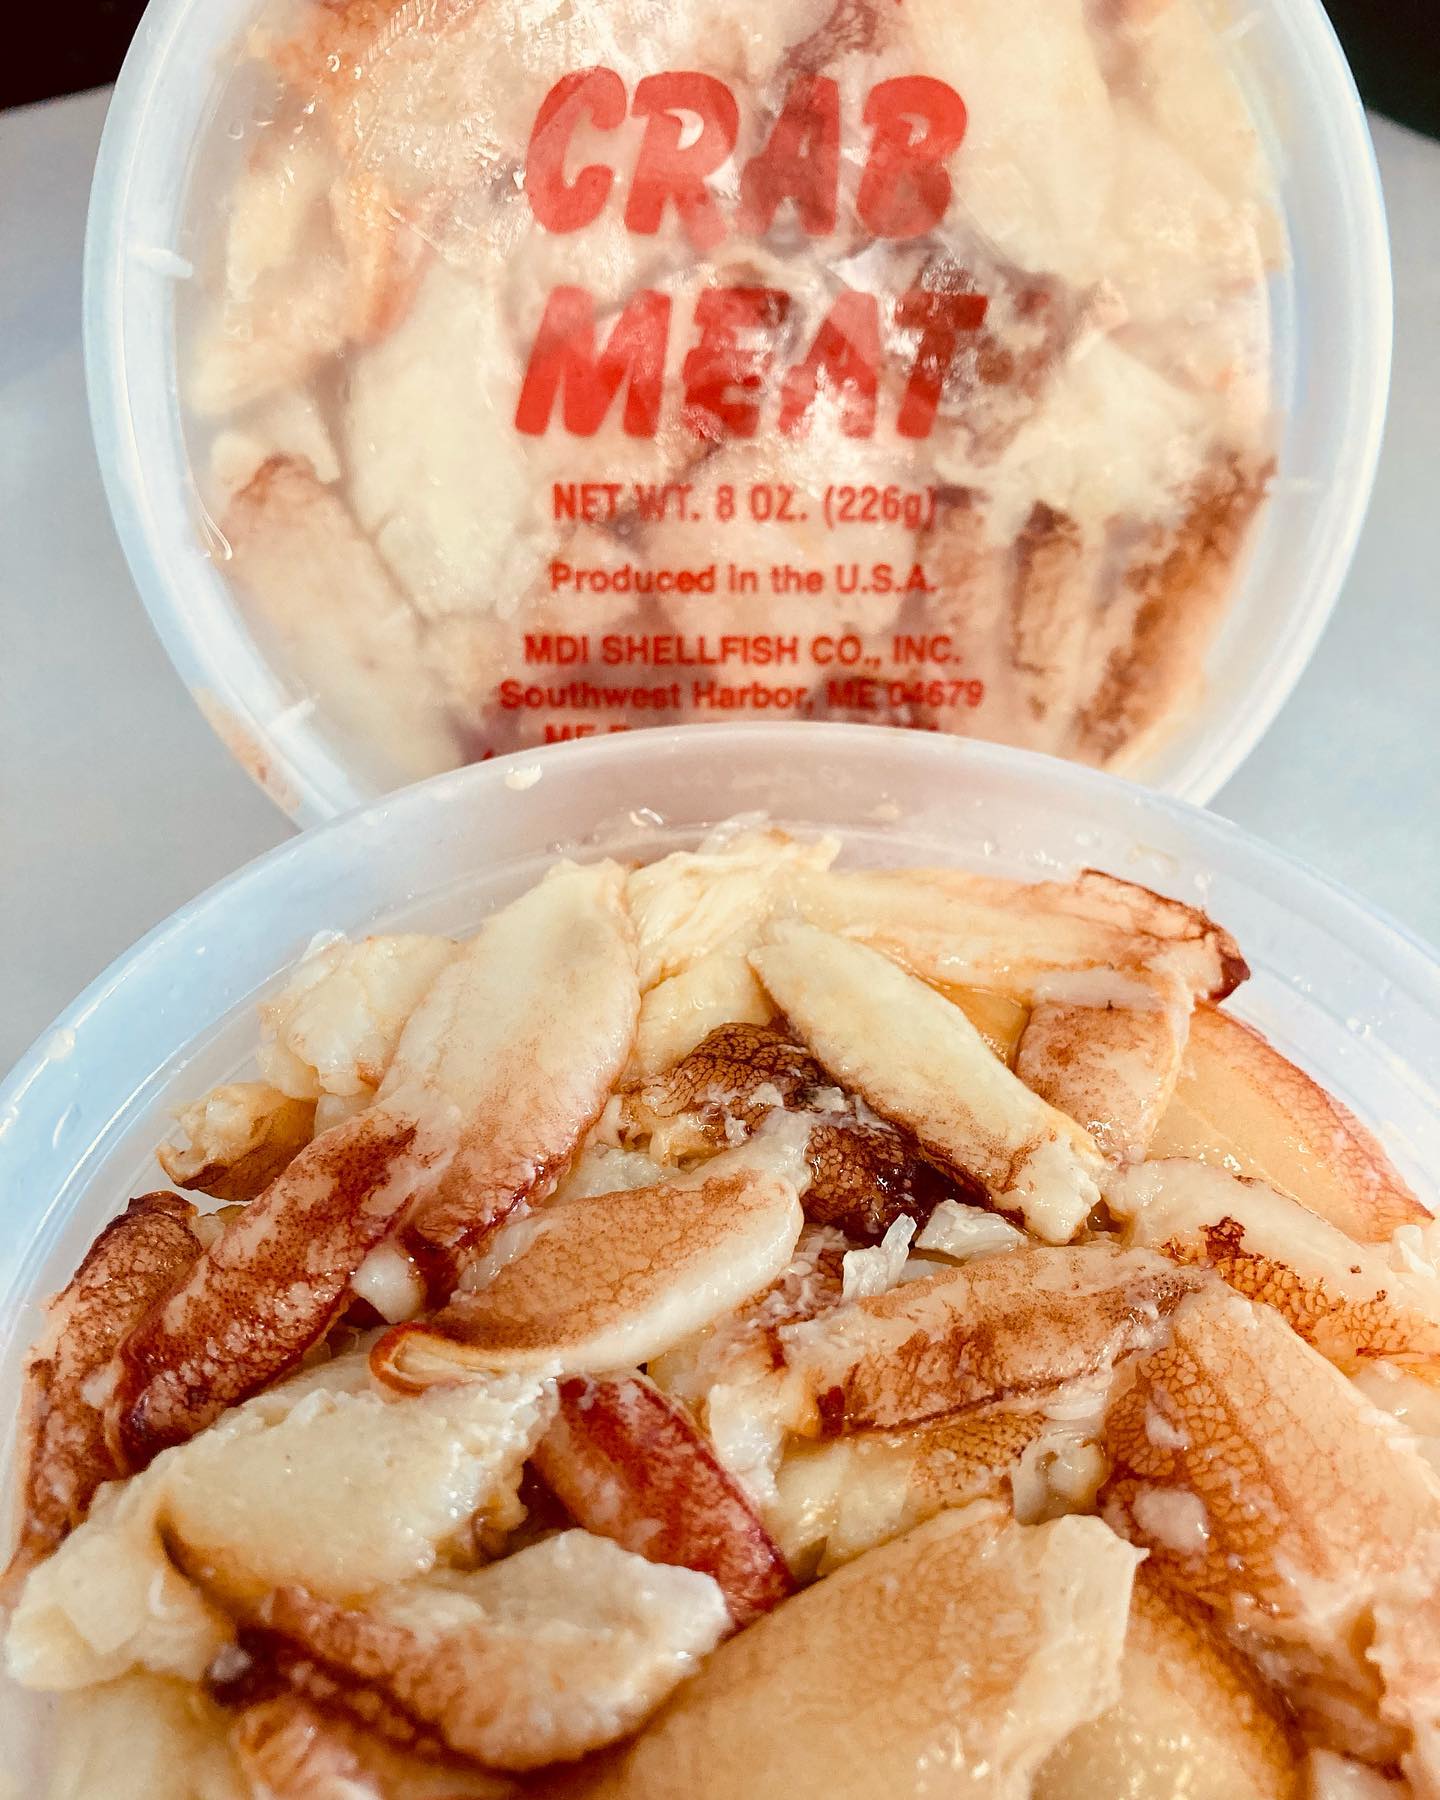 More fresh Crabmeat 🦀 from Maine just arrived! Hand picked by true pros south of Bar Harbor (check out how they get that tasty leg meat meat out whole). Almost too pretty to eat!